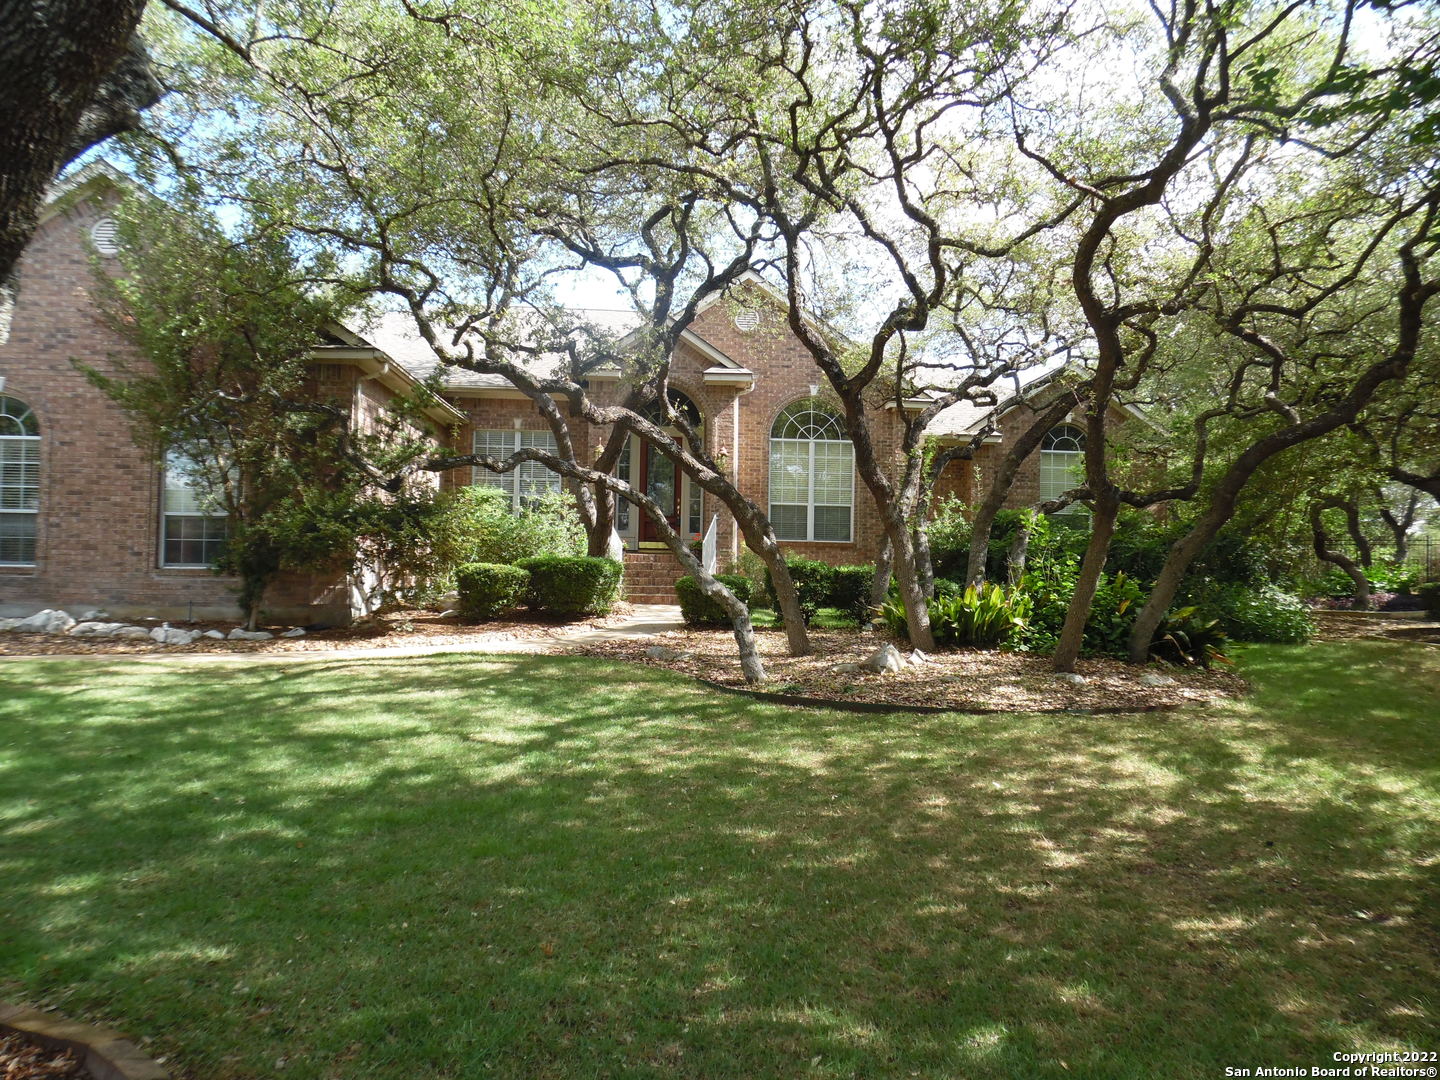 Home is in sought after Legend Oaks neighborhood!!! Looking for land, 3 car garage, pool & hot tub, NEISD, YOU found it!!!Great backyard for entertaining, plus a pergola and covered patio. 2nd bathroom has easy access to backyard without having to go into the house.  Awesome 1 story home ready for you and your vision. Located close to schools, shopping, dining and major highways-281 & 1604. Please excuse any boxes, in the process of packing.